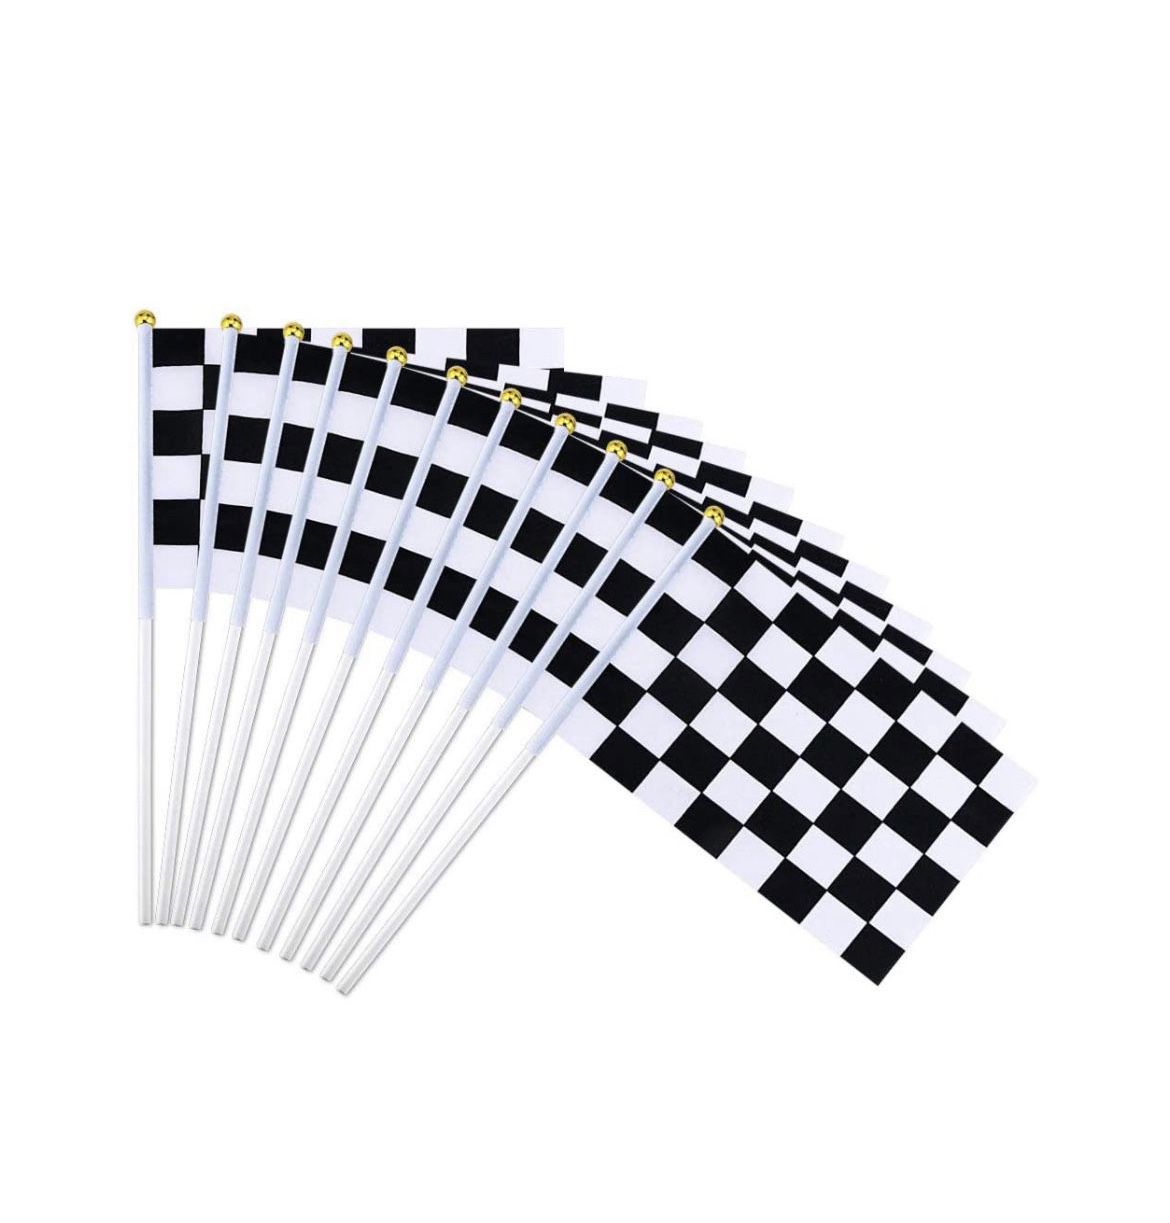 12 Pack Checkered Black and White Racing Stick Flag with Plastic Stick for Sports Event, Racing, Race Car Party and Kids Birthday Decoration, 8